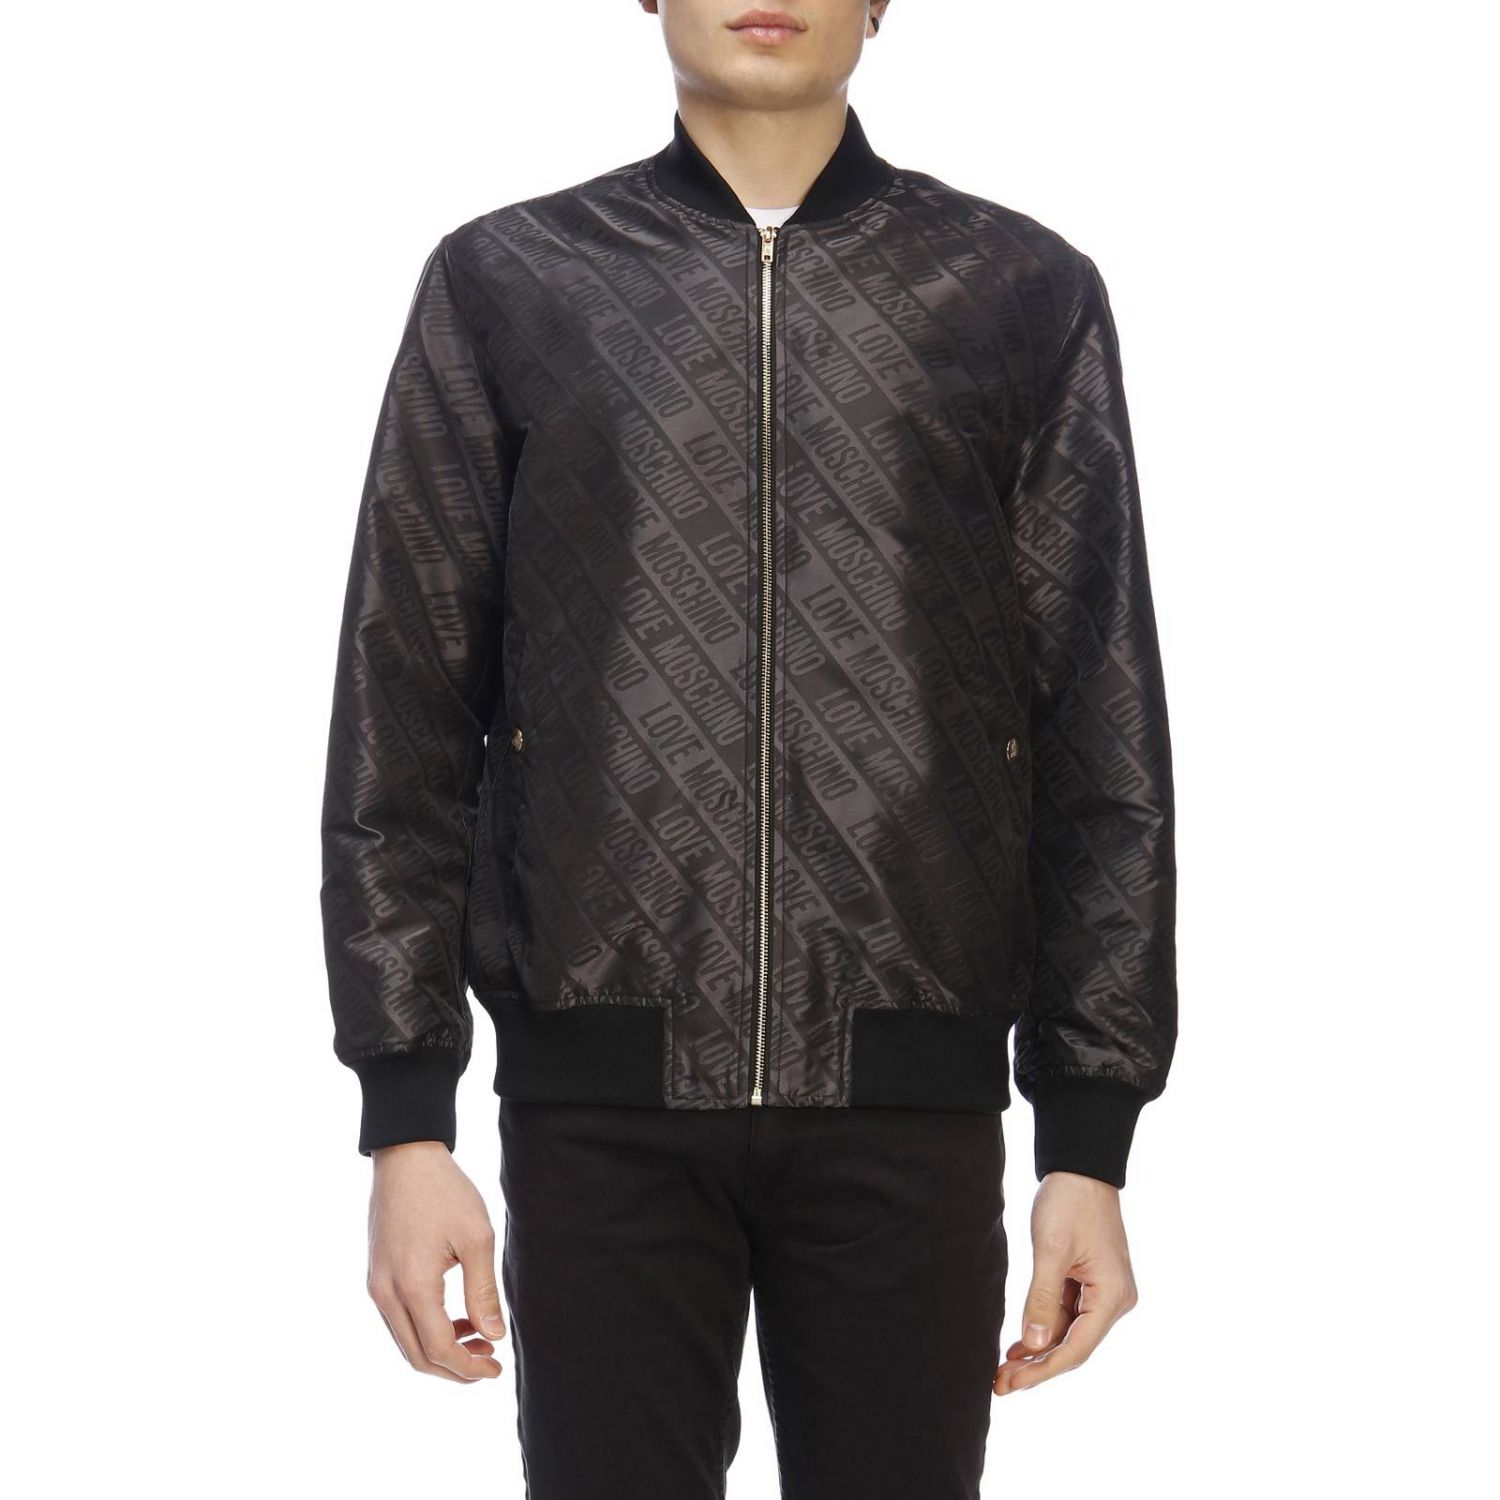 Love Moschino Outlet: Jacket men Moschino Love - Black | Jacket Love ...